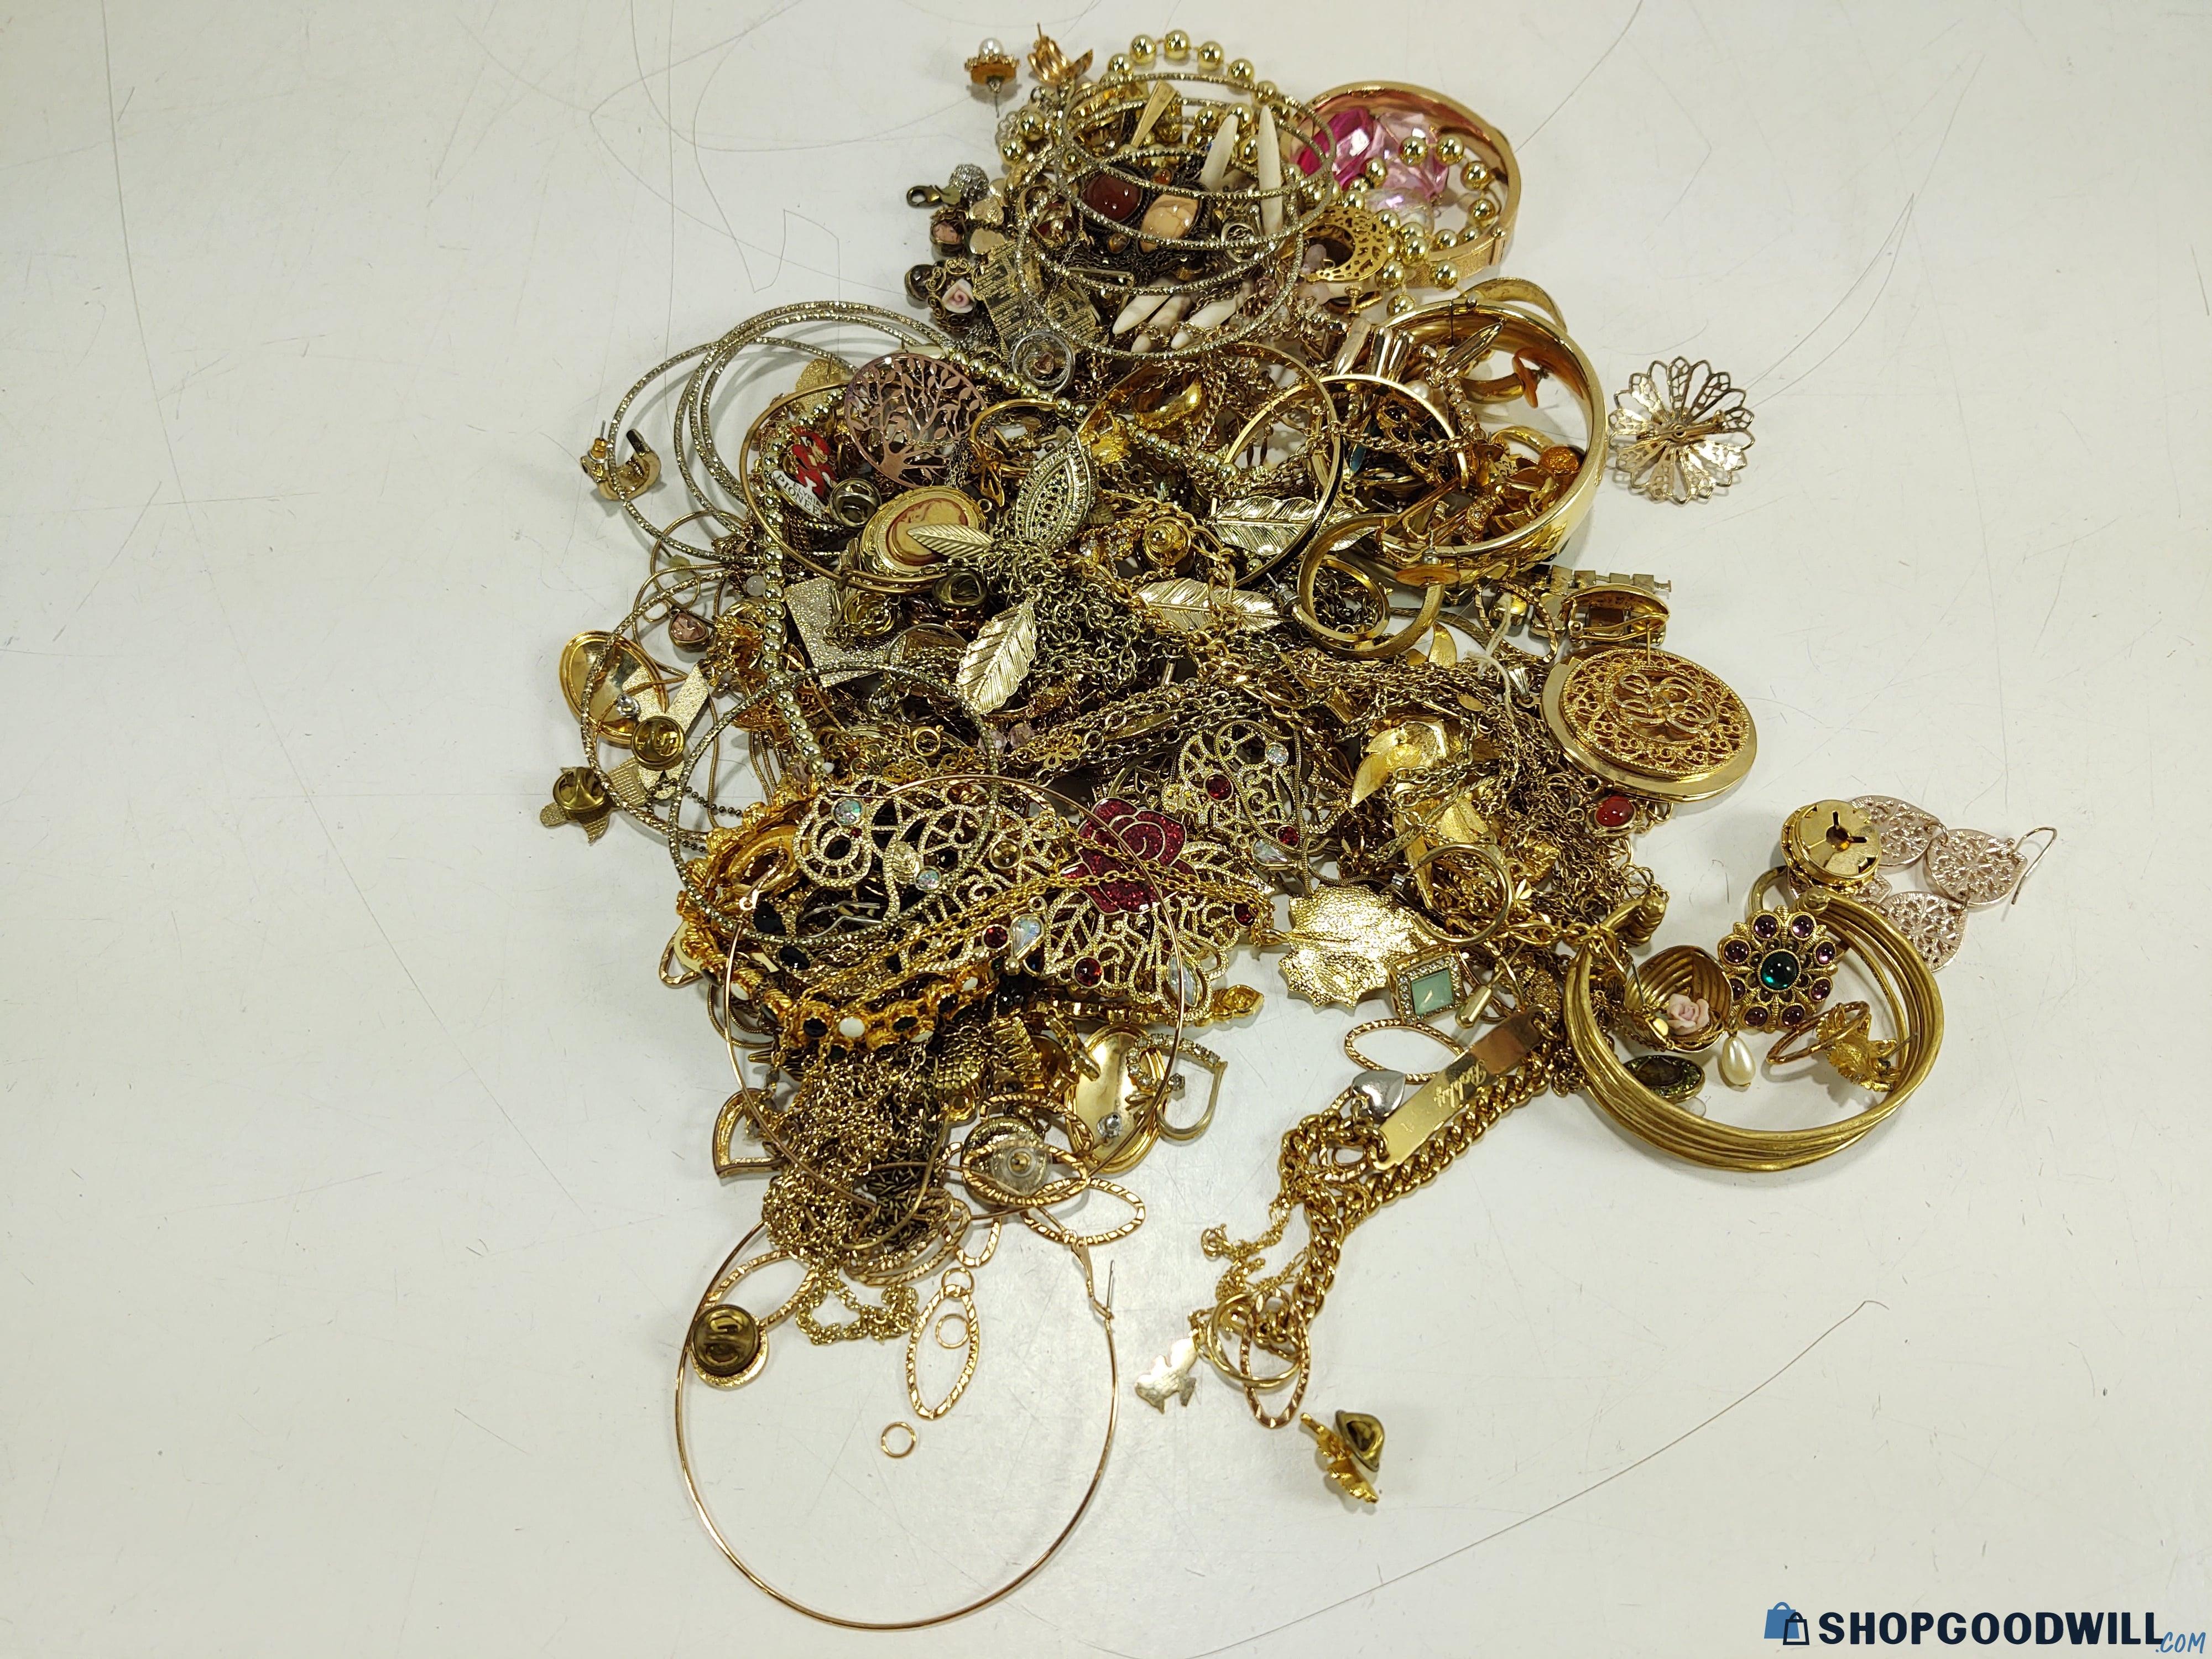 2.50lb Lot of Gold Toned Jewelry (Not Tested) - shopgoodwill.com